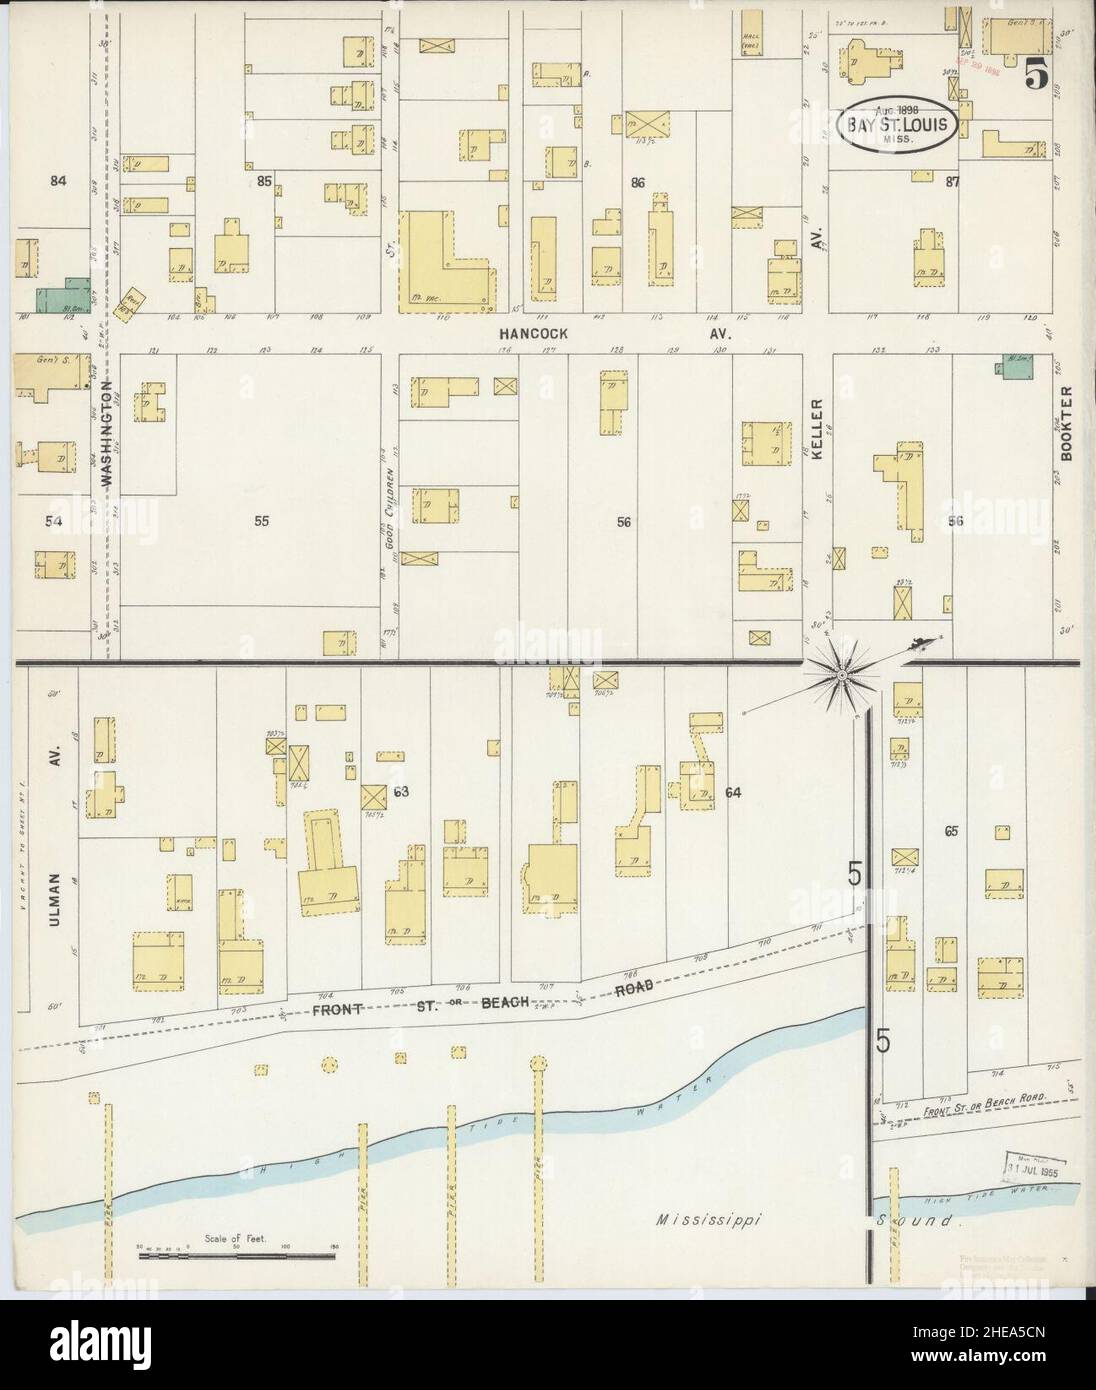 Sanborn Fire Insurance Map from Bay Saint Louis, Hancock County, Mississippi. Stock Photo